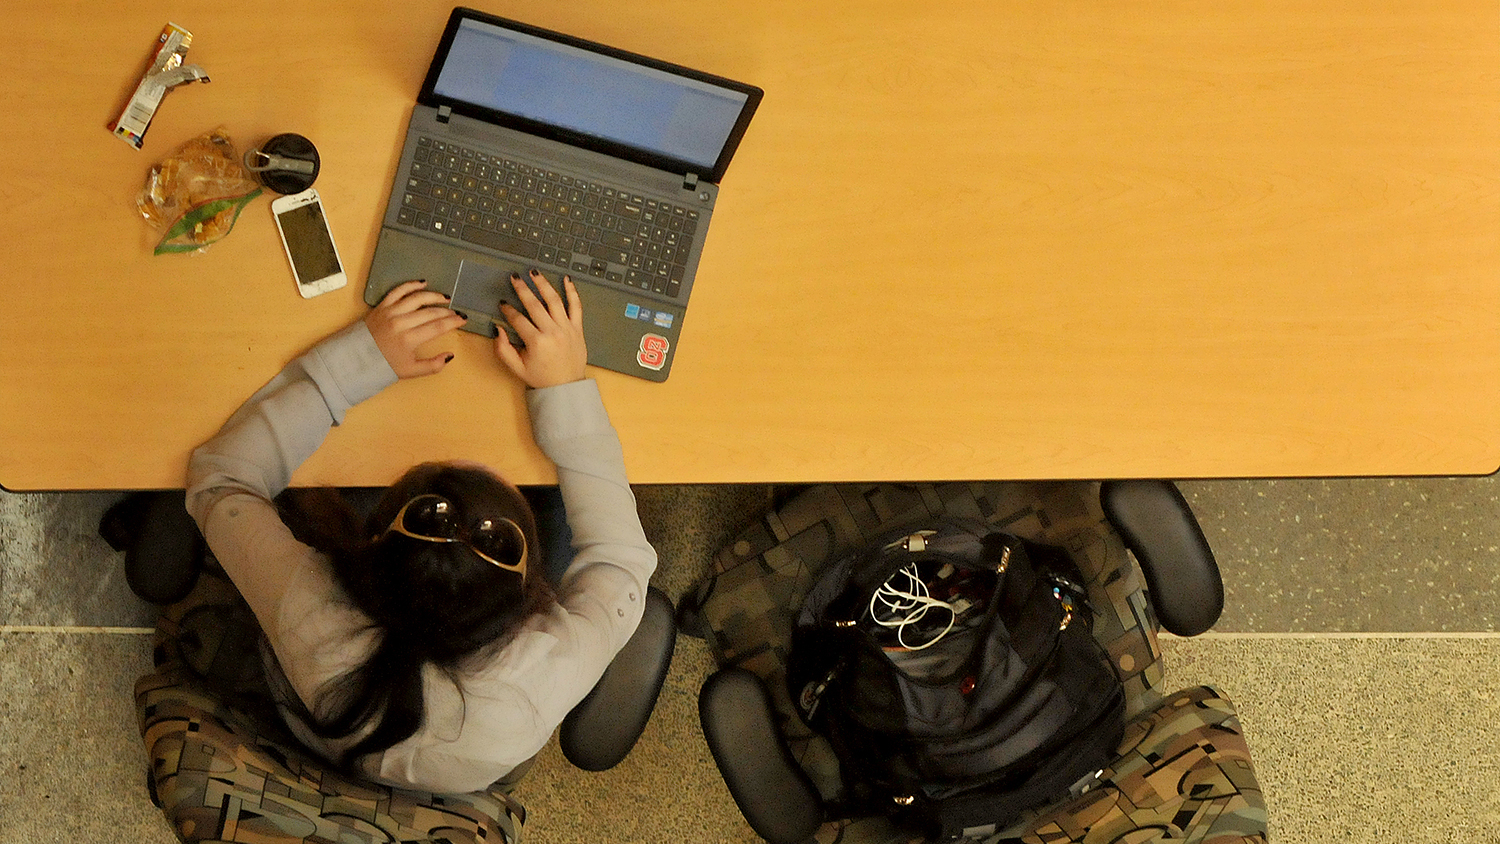 Student works on a laptop.